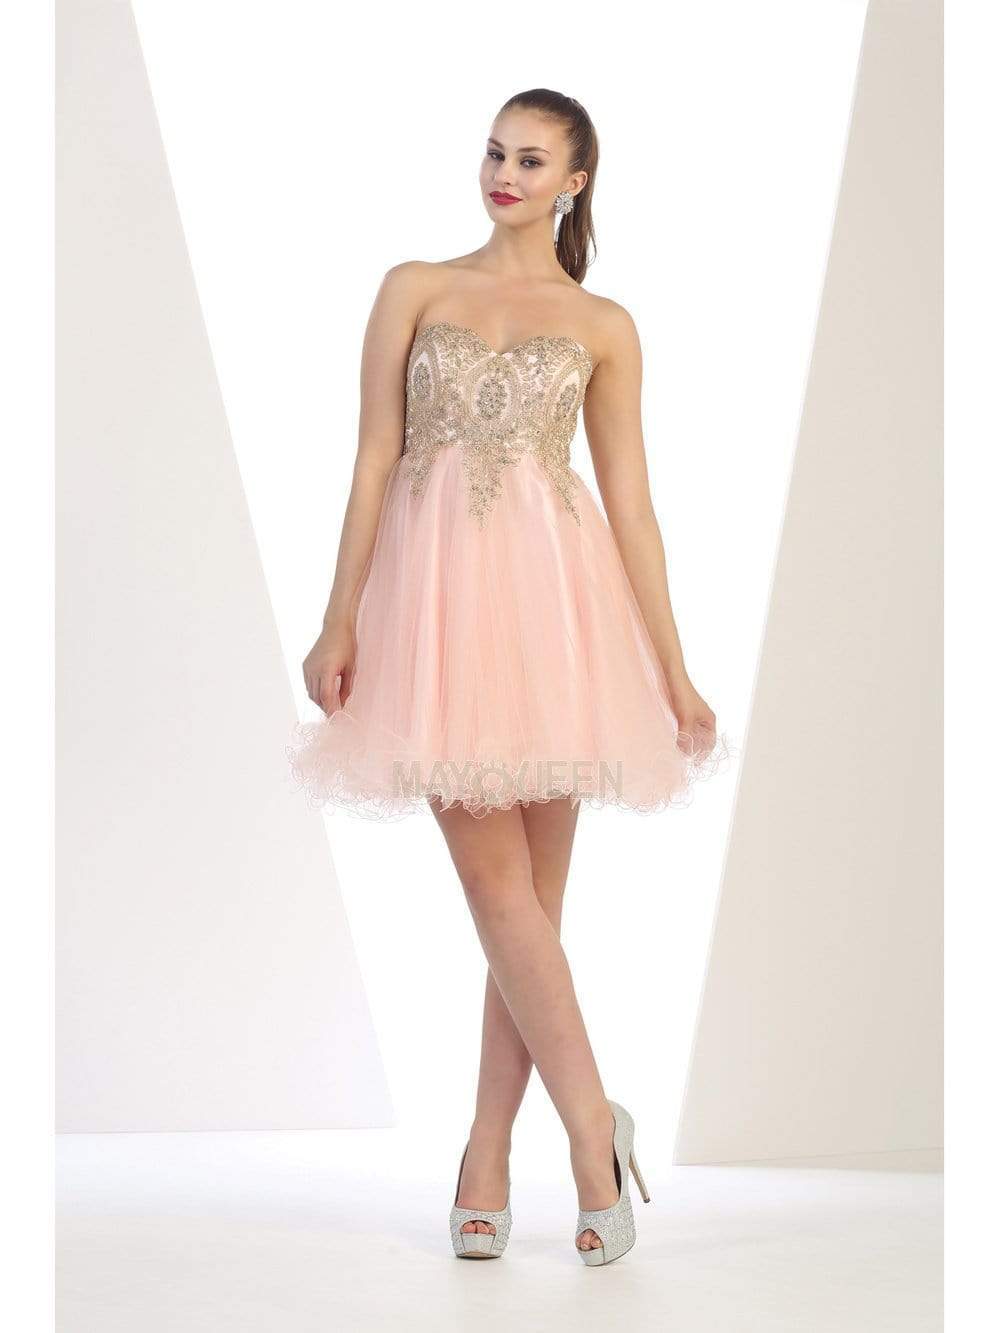 Image of May Queen - MQ1414 Lace Appliqued Strapless Sweetheart Cocktail Dress